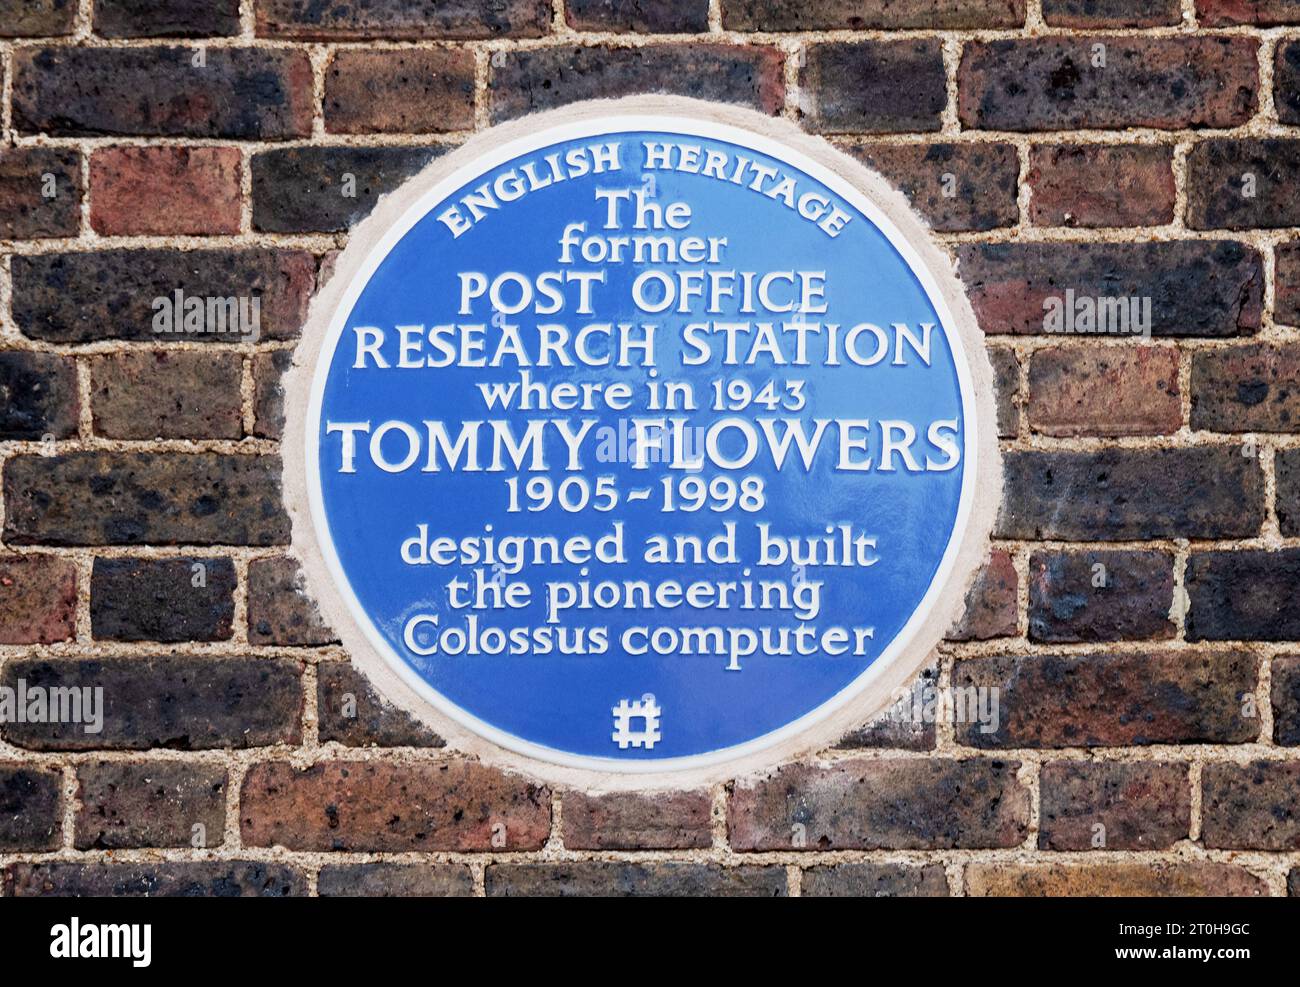 Tommy Flowers Blue Plaque for his WWII work in designing and building the worlds first electronic thermionic valve programable computer, Colossus, at the Post Offices Research Laboratories in Dollis Hill London. This was demonstrated in 1943 then later transferred to Bletchley Park where it assisted the war effort. When the Post Office Research Laboratories closed they were converted to flats, Chartwell Court. On September 6th 2023 during an English Heritage ceremony, the blue plaque was unveiled on the flats end wall, viewable from the adjacent Flowers Close. Credit: Stephen Bell/Alamy Stock Photo